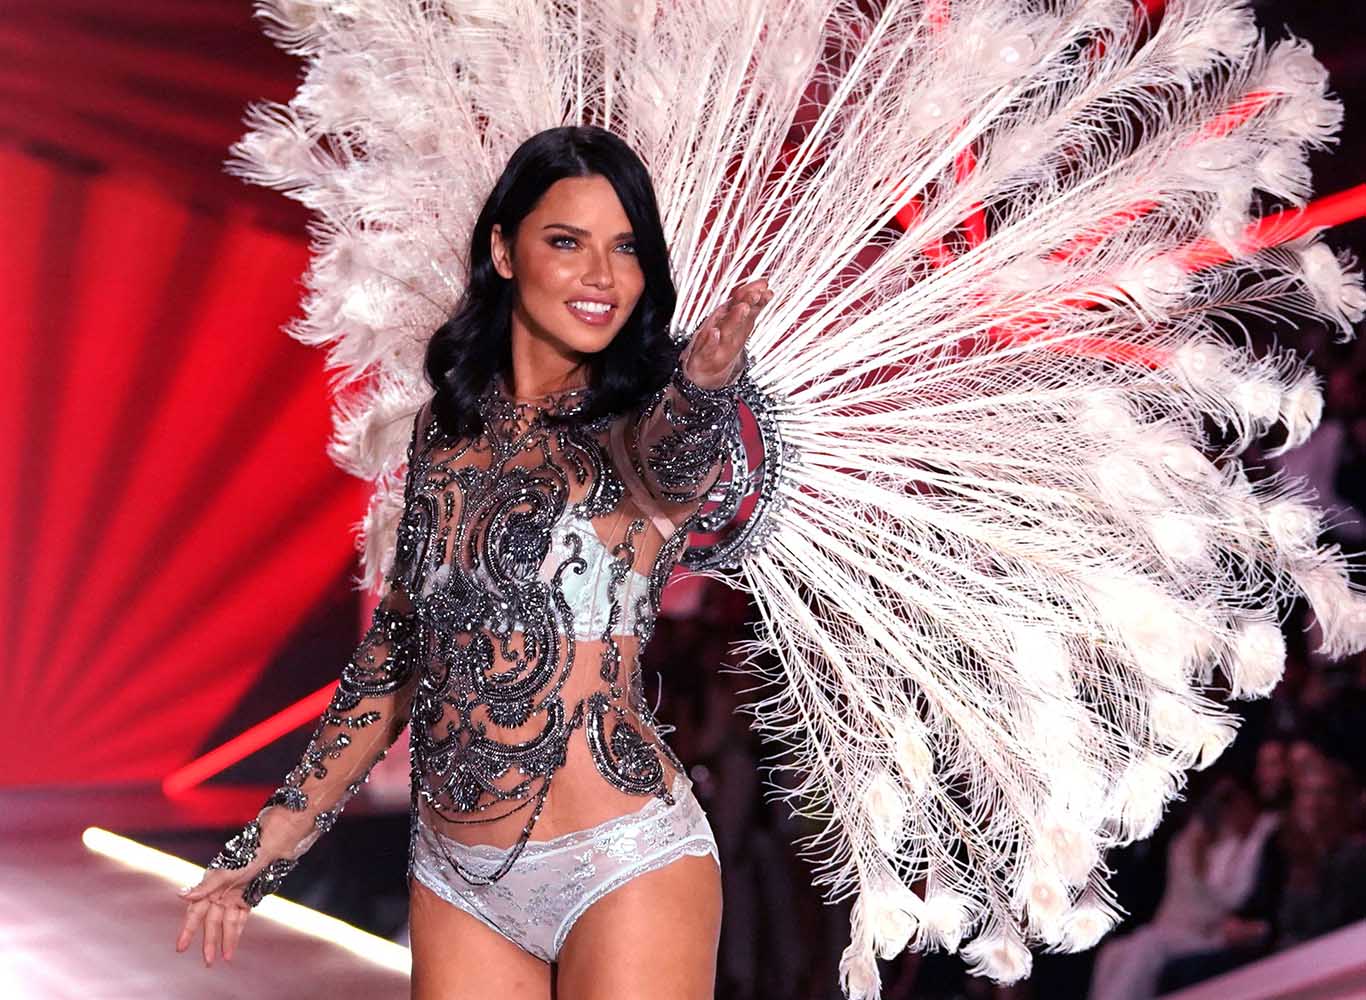 Victoria’s Secret Fashion Show: The Genesis of the "Angels." 